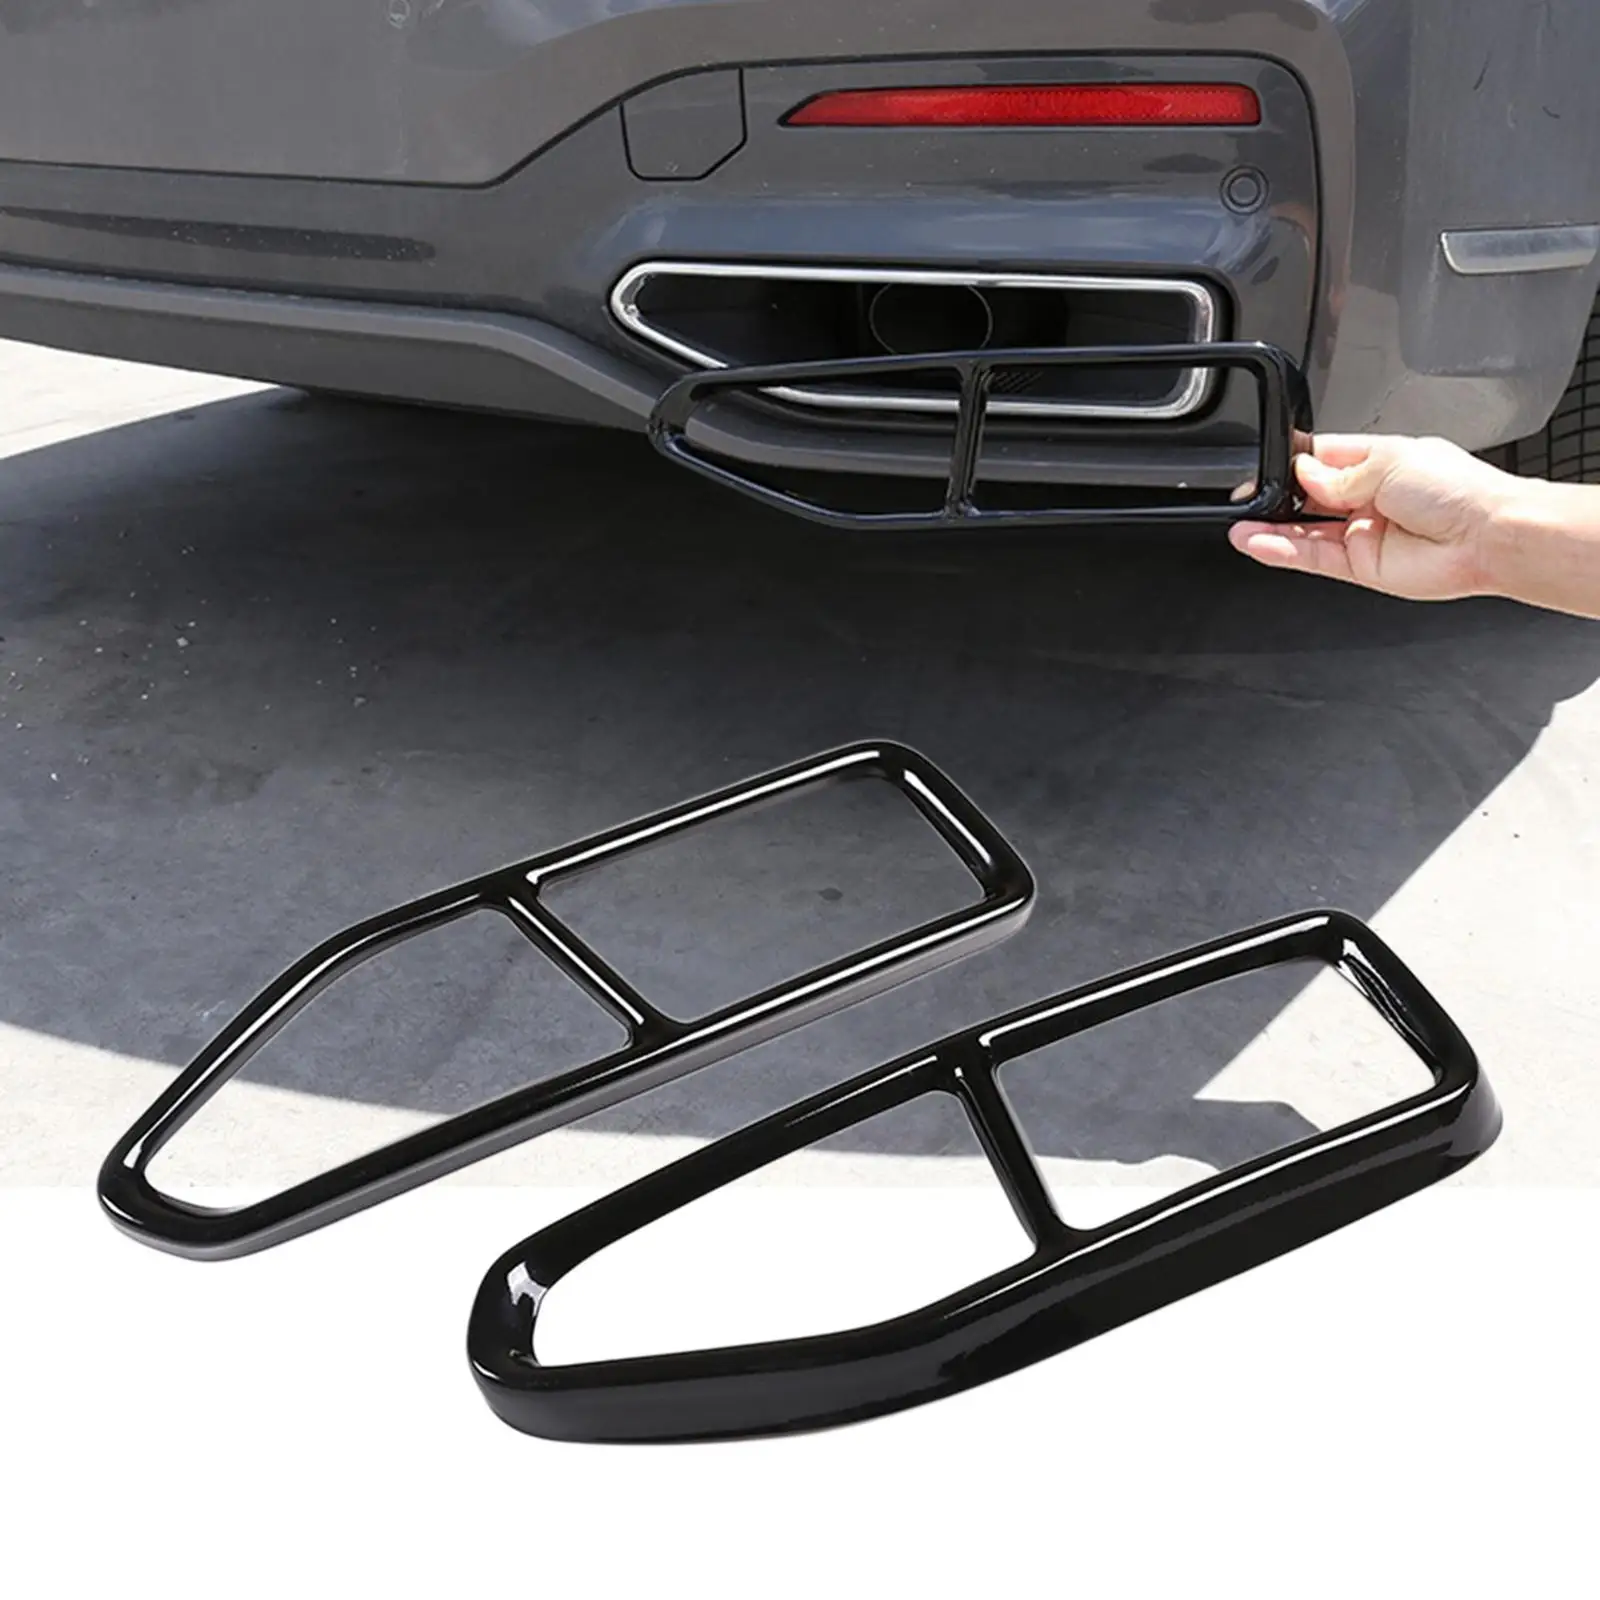 2x Tailpipe Trim Frame Protection Cover Scratchproof Exhaust Pipe Output Cover for BMW 7 G11 2019-2020 G12 Auto Accessories